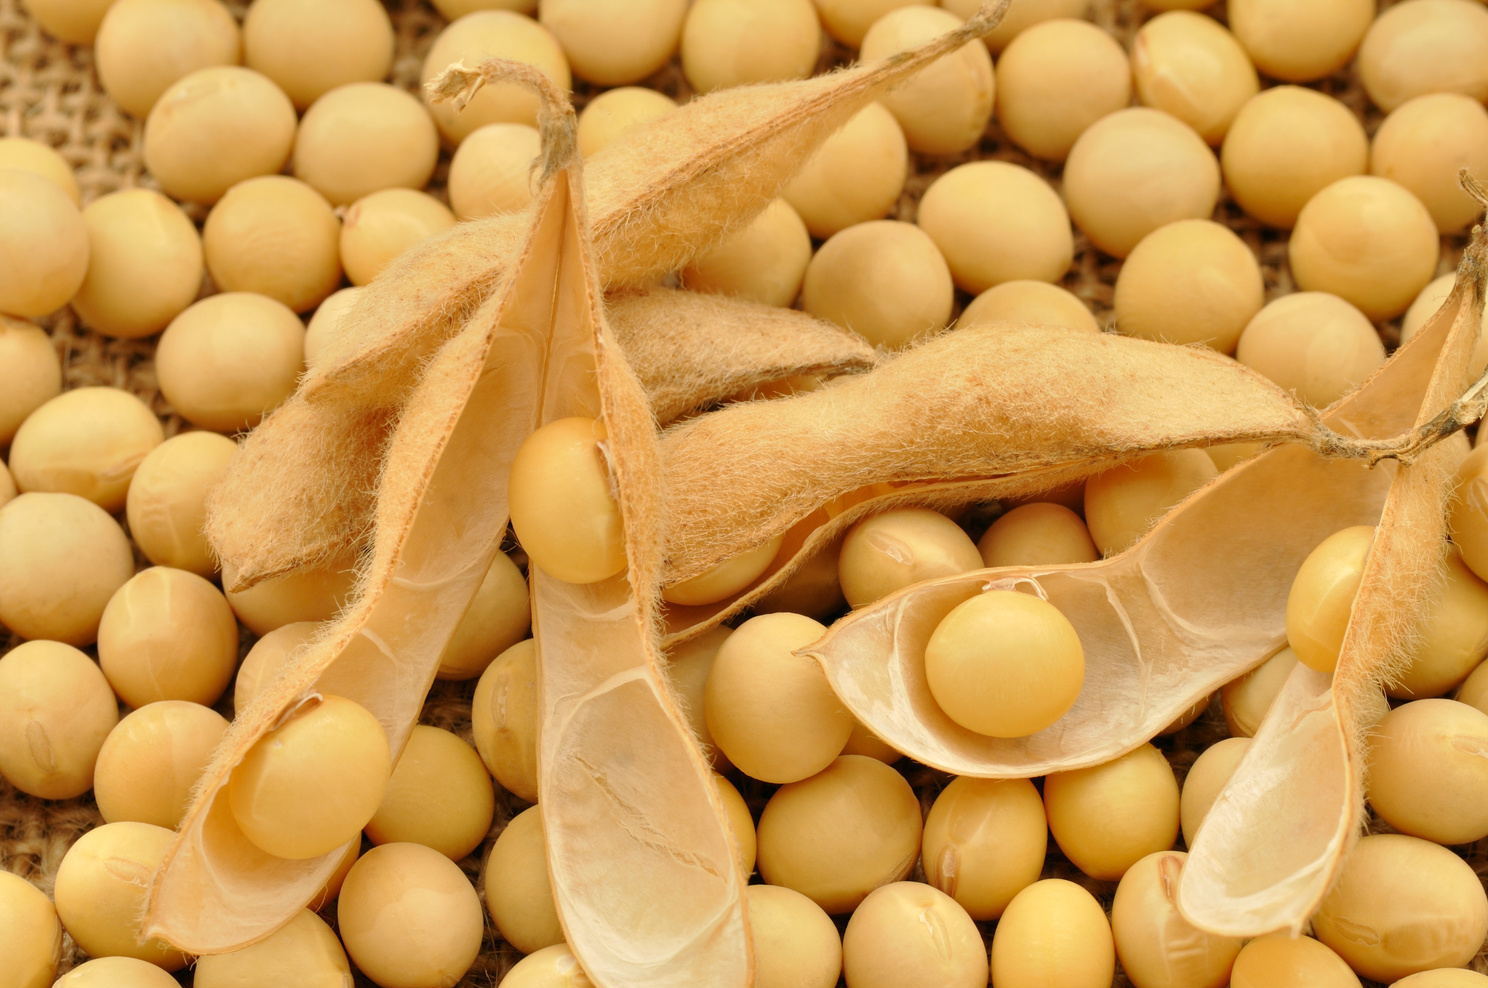 La Nina may have little effect on soybean yield in South America